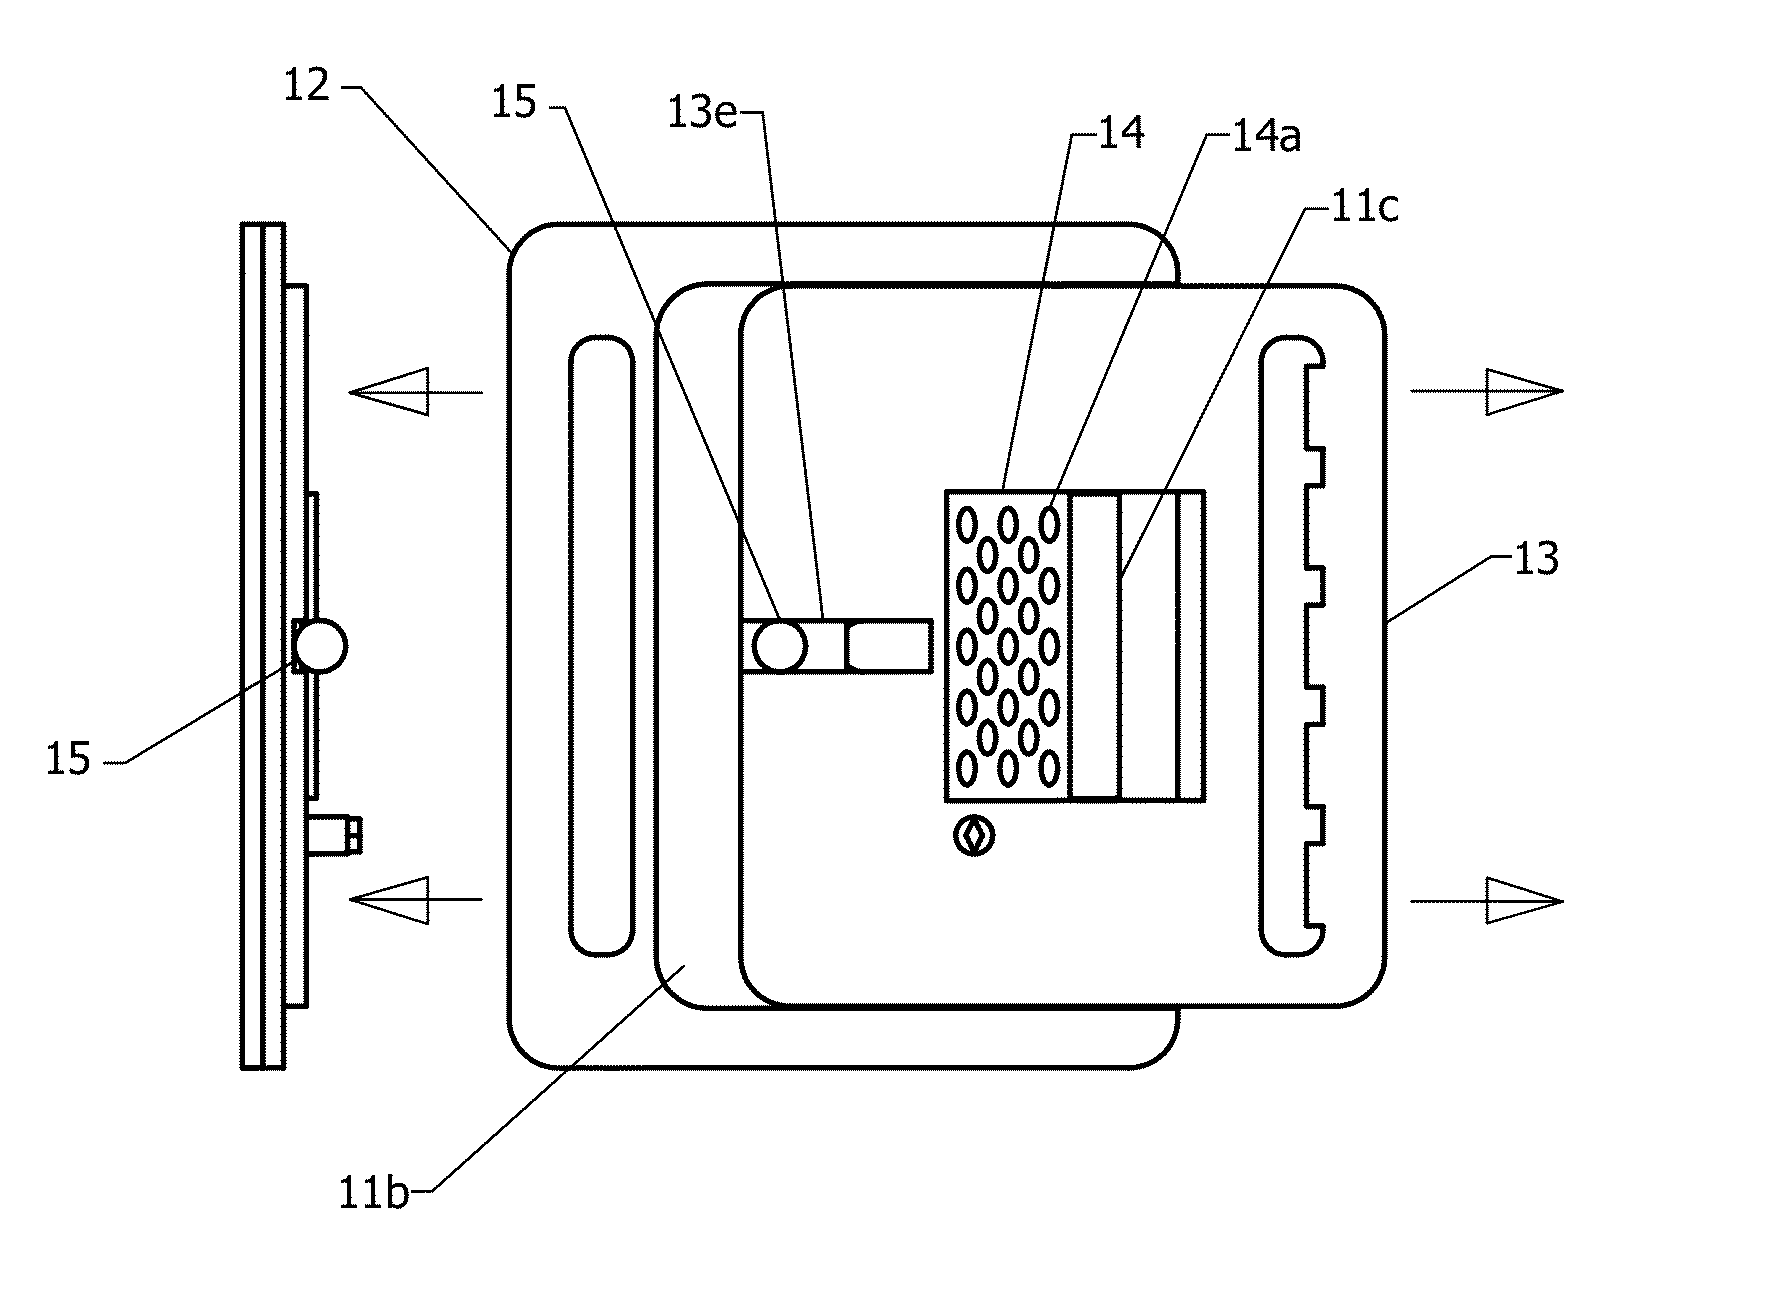 Self-locking tourniquet and automated timer